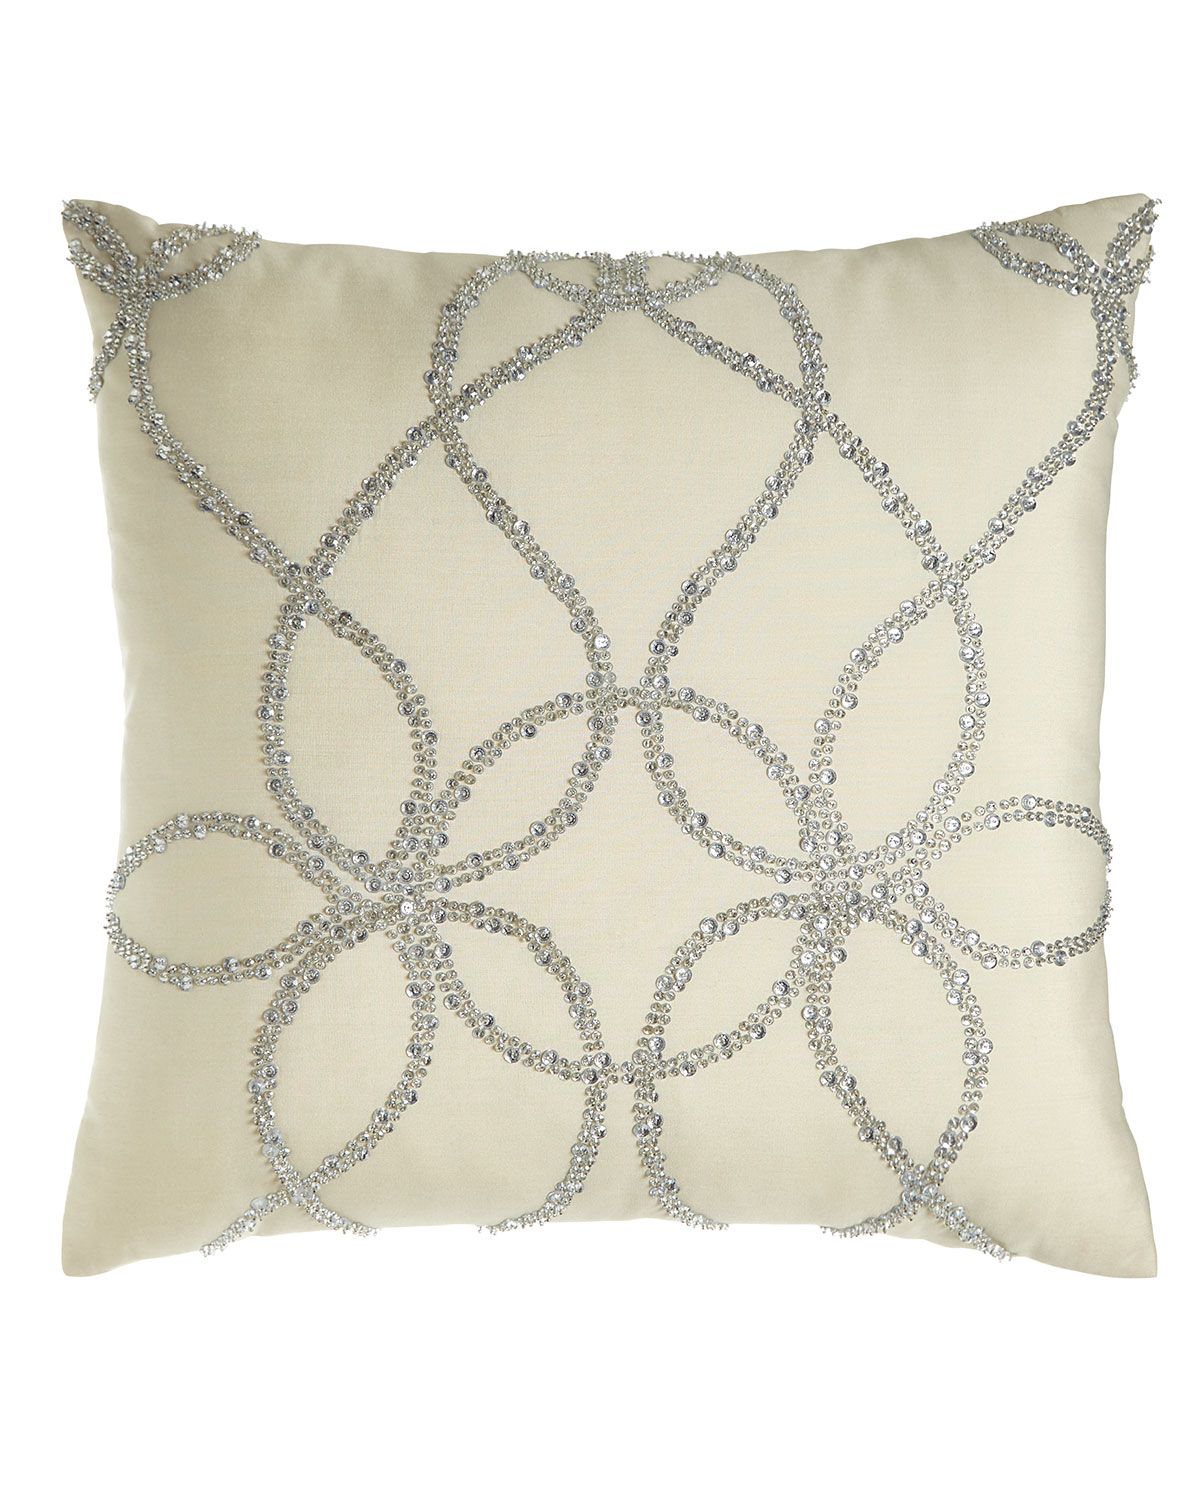 Ivory Silk Pillow with Silver Beading, 22"Sq. | Neiman Marcus